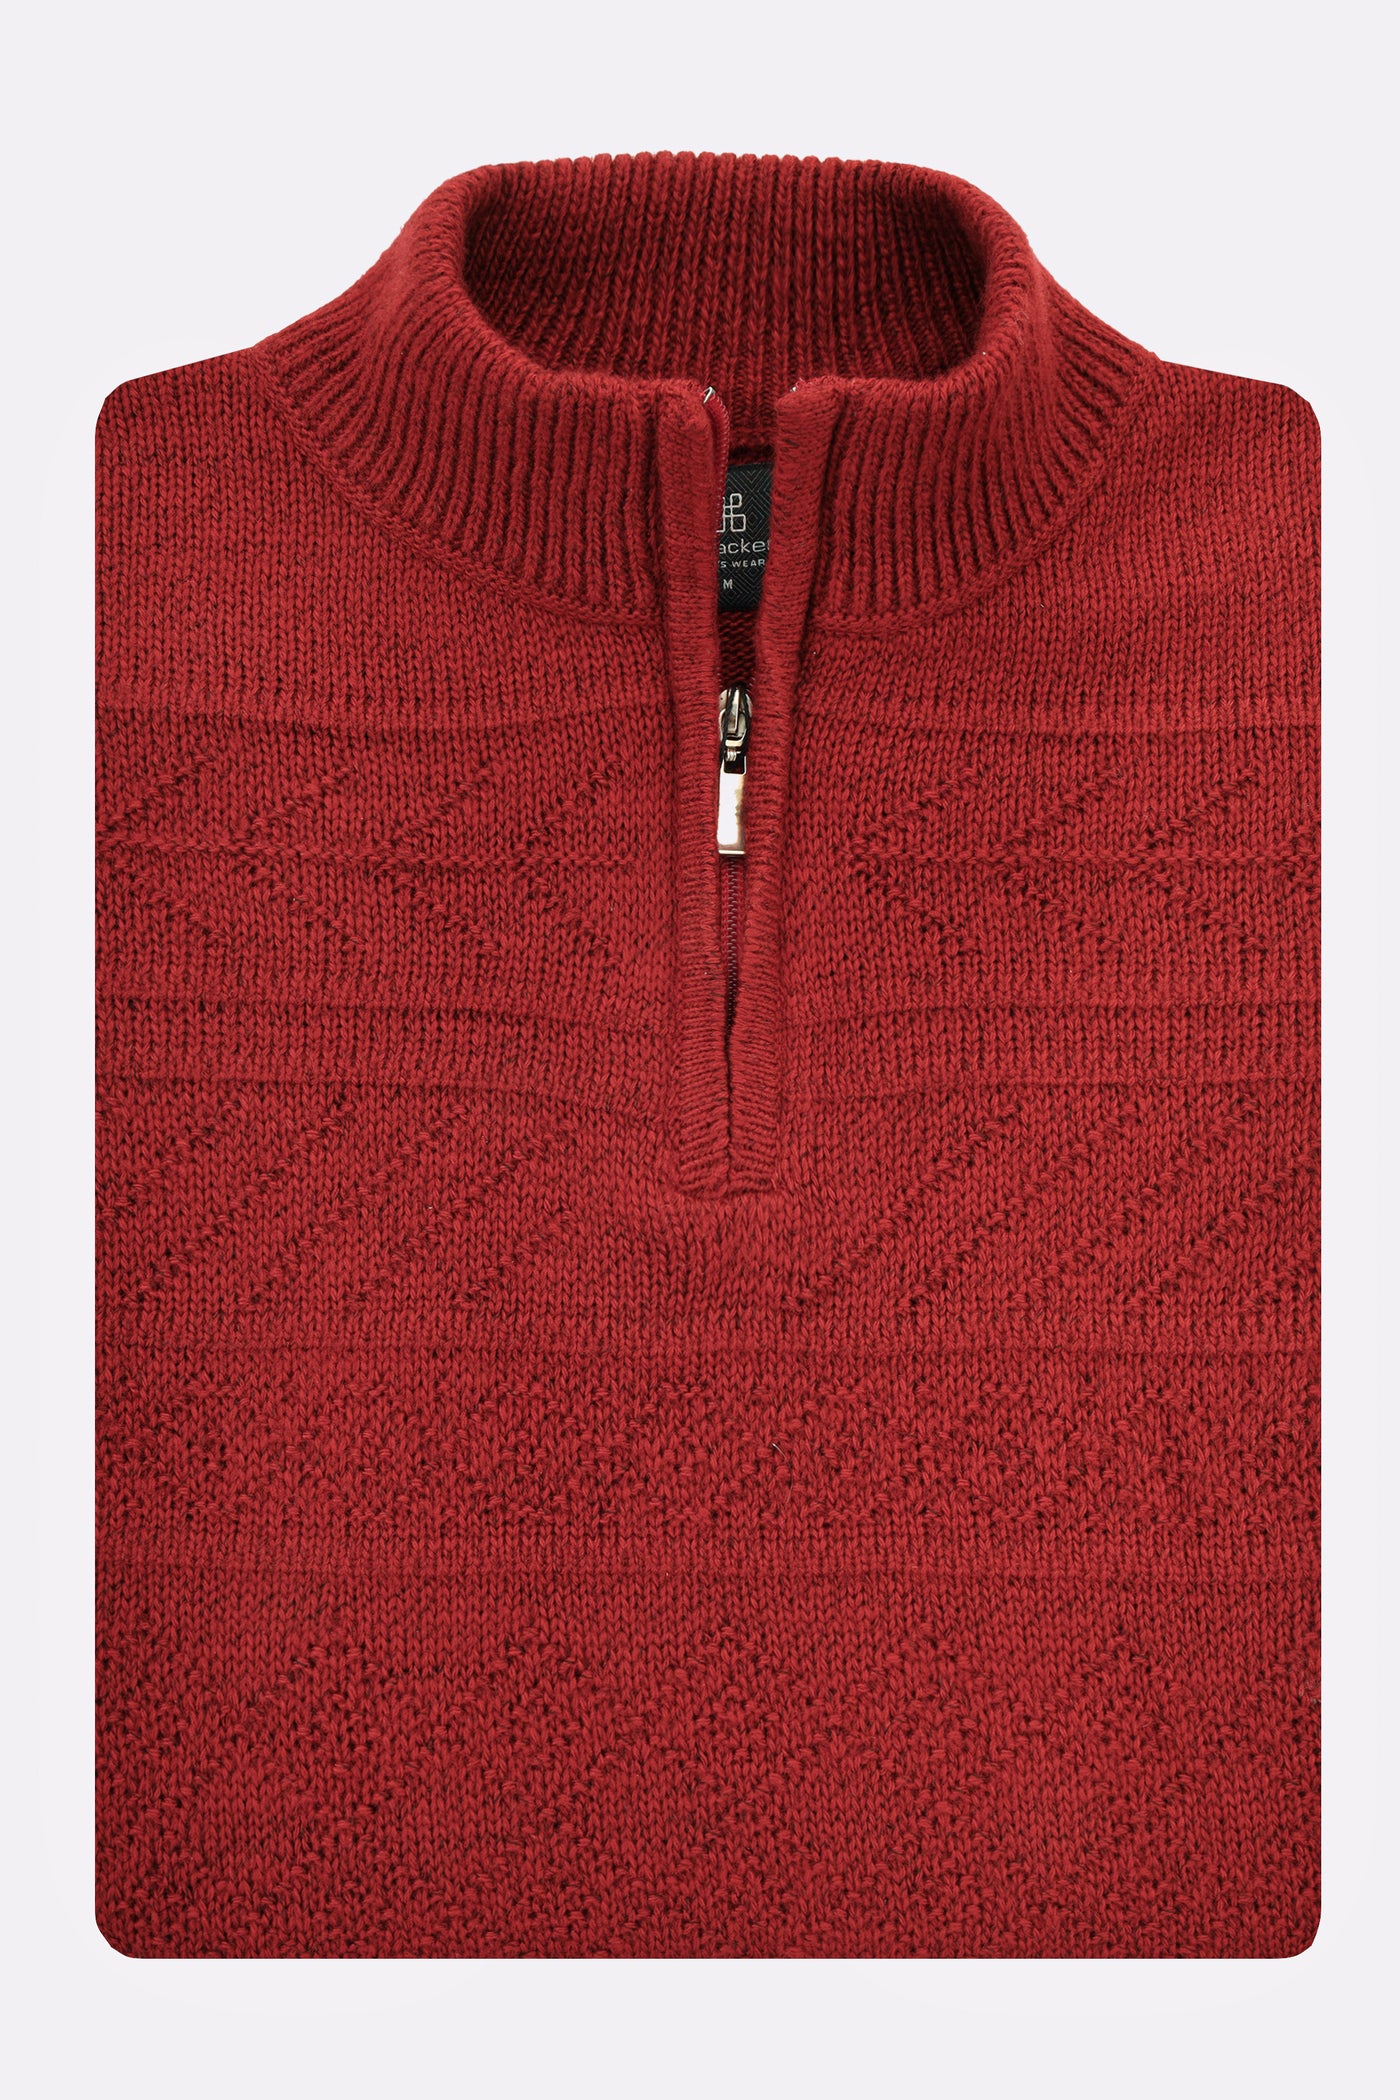 Jacquard Knitted Quarter Zip Fire Brick Pullover